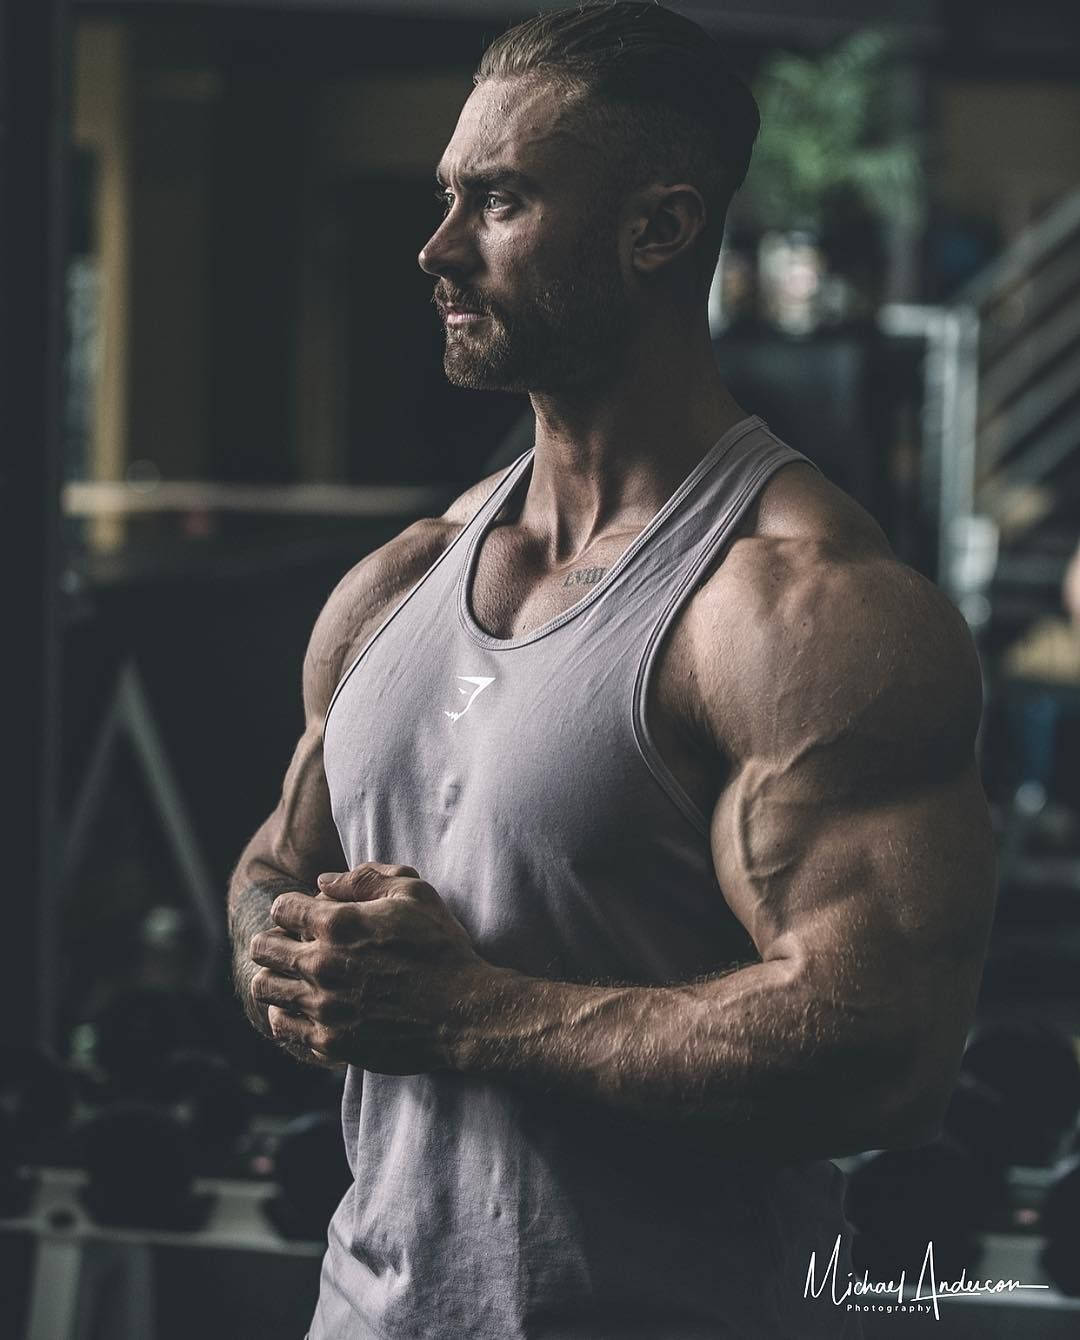 Dramatic Side Profile Of Chris Bumstead Wallpaper